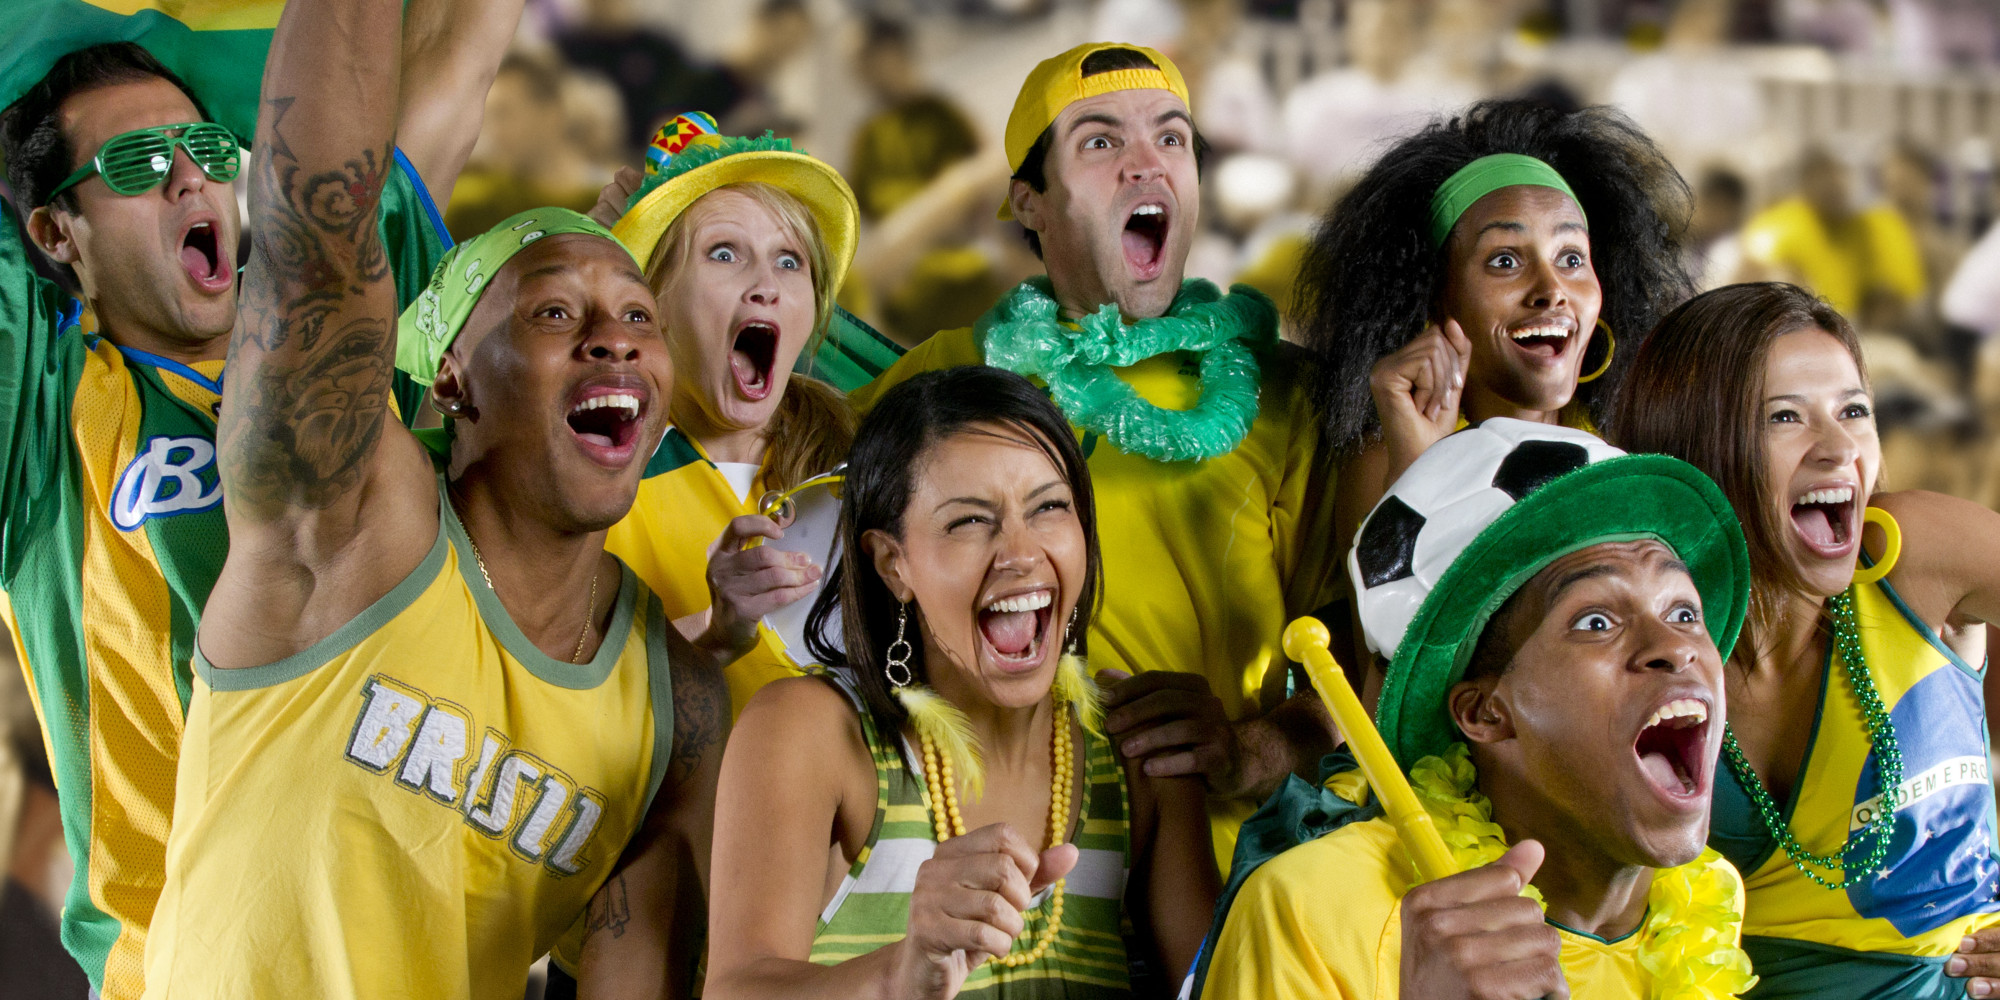 15 Ridiculous Things People Say When They Find Out You're Brazilian